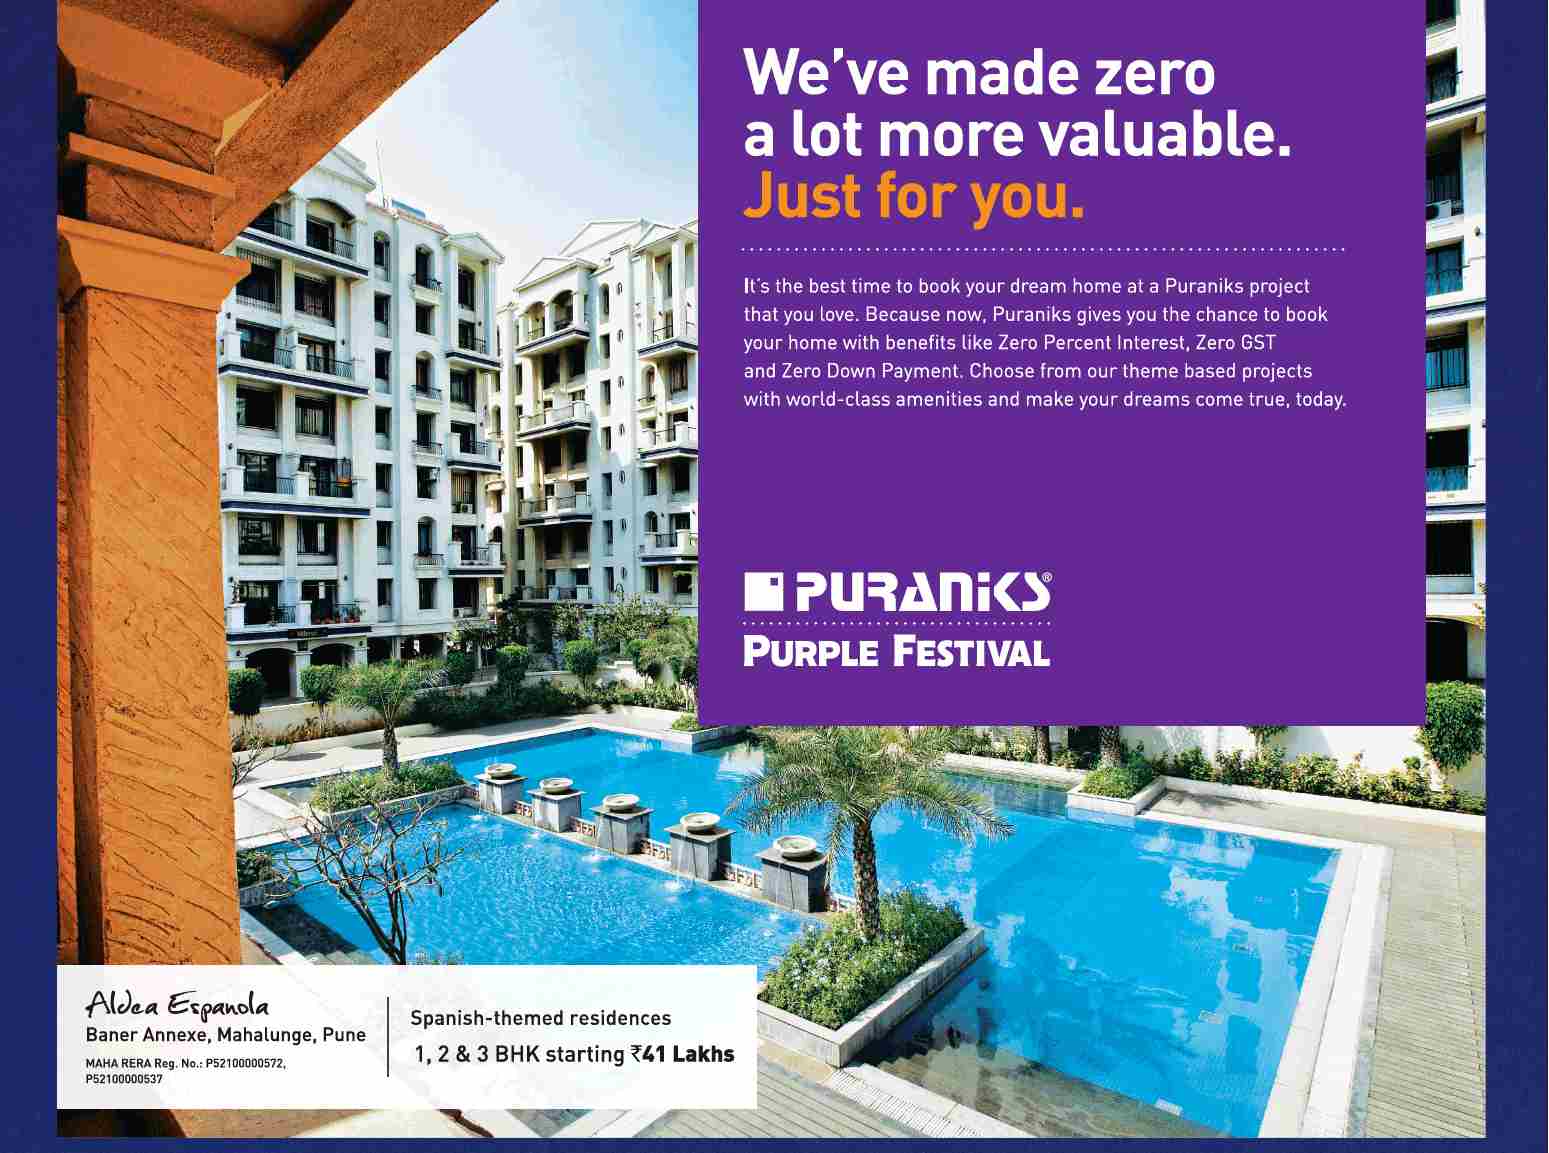 Book your home with benefits like 0% interest, GST & down payment at Puranik Aldea Espanola, Pune Update